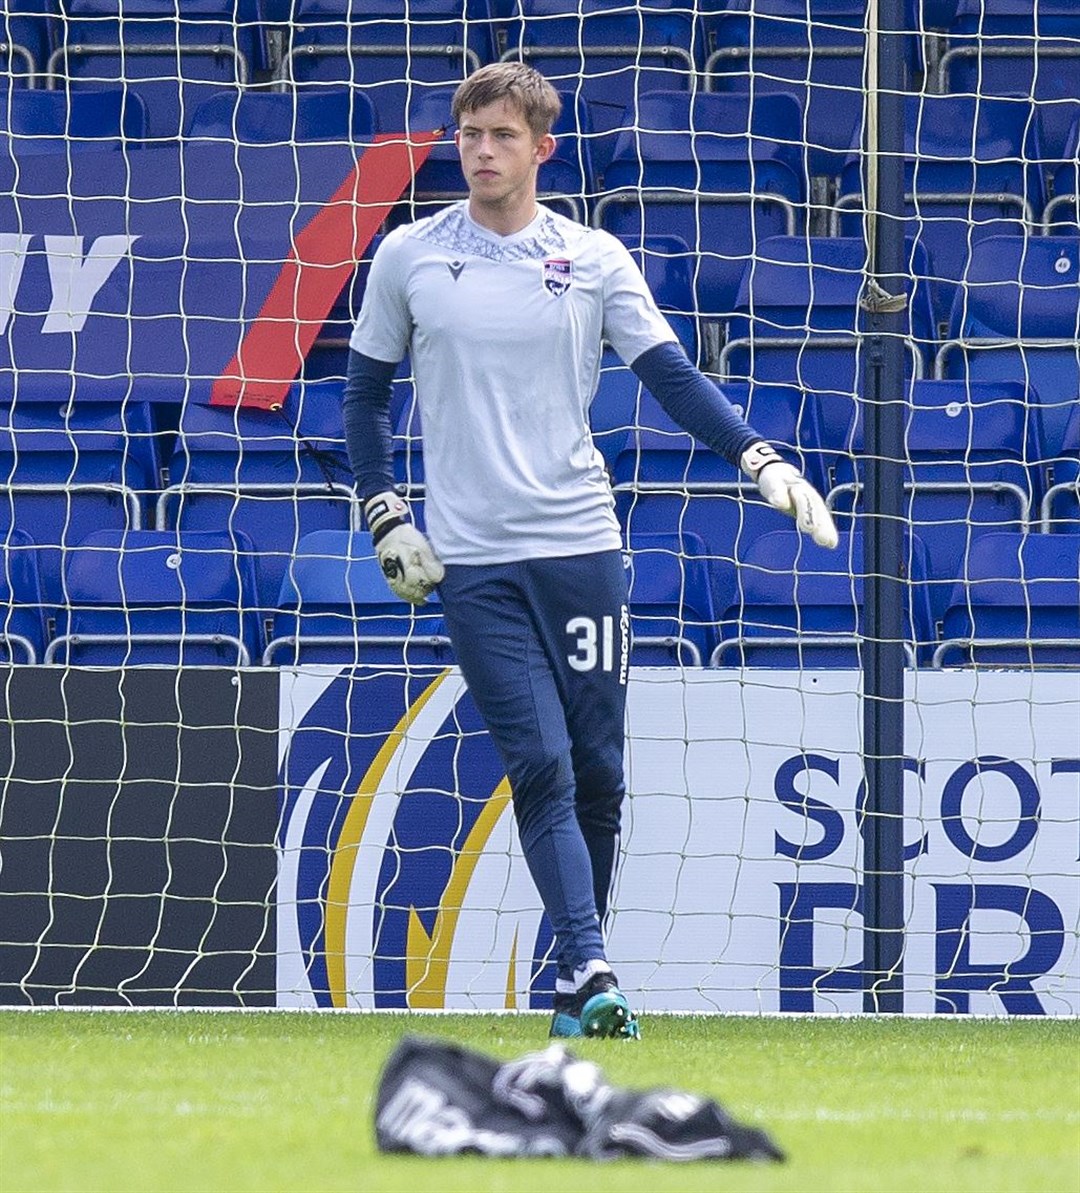 Ross Munro can often be seen helping Ross County's goalkeepers prepare on matchdays as he provides cover in Dingwall. Picture: Ken Macpherson